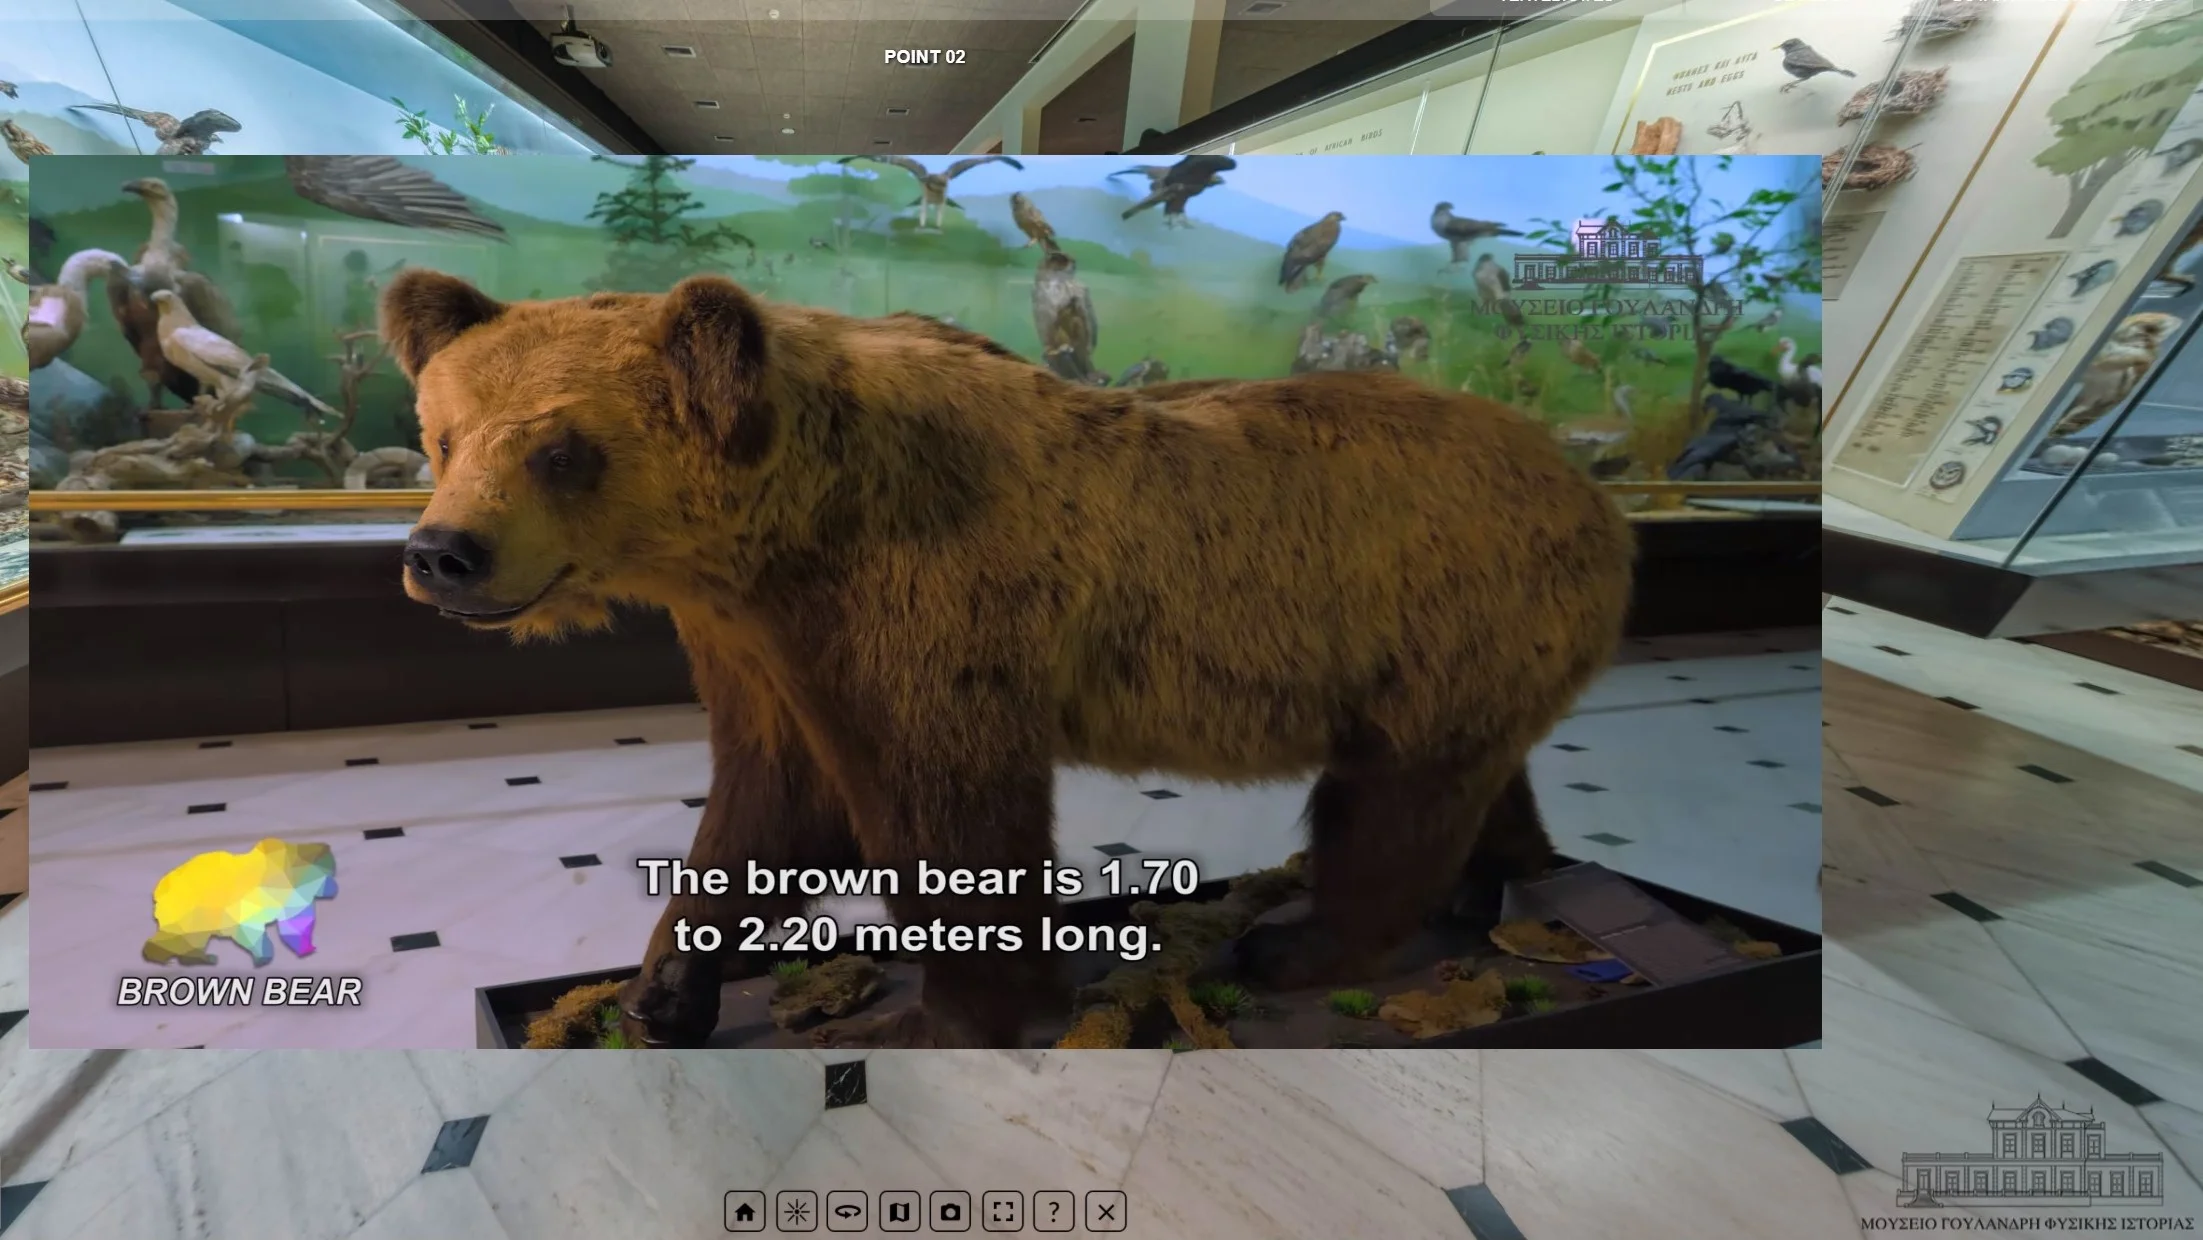 Brown bear exhibit at the virtual tour of the Goulandris natural history museum